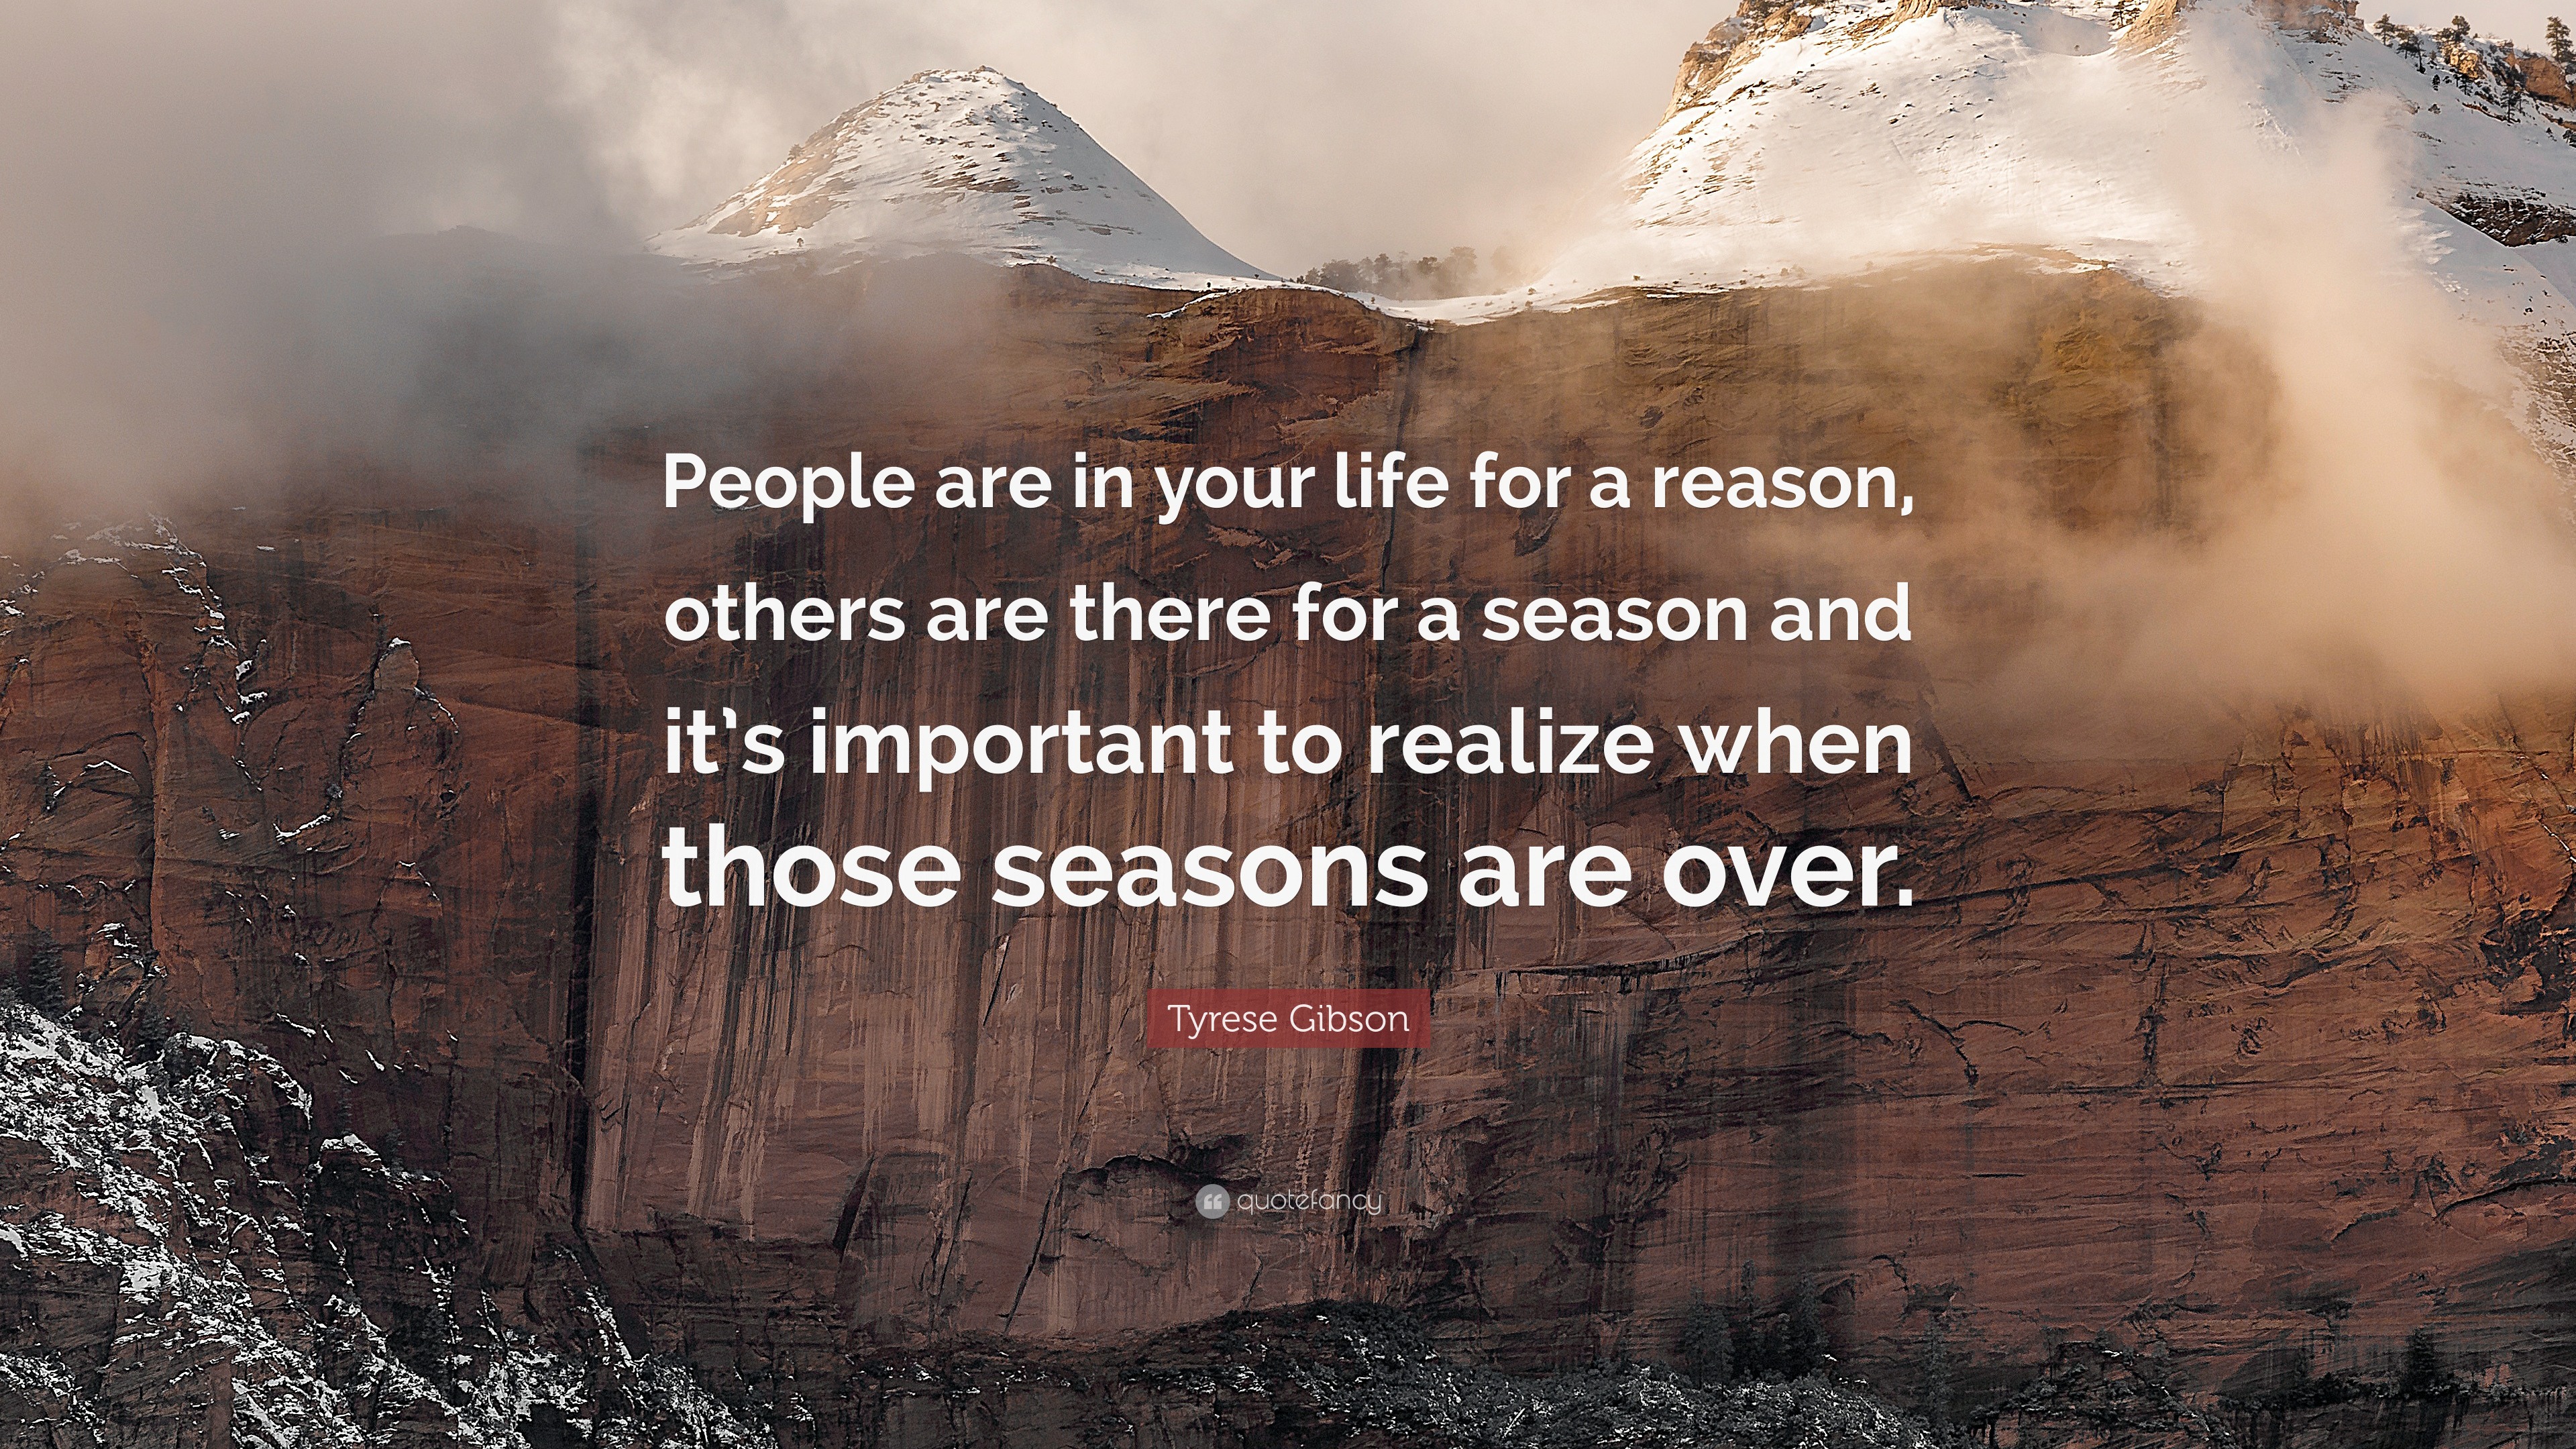 Tyrese Gibson Quote “People are in your life for a reason others are